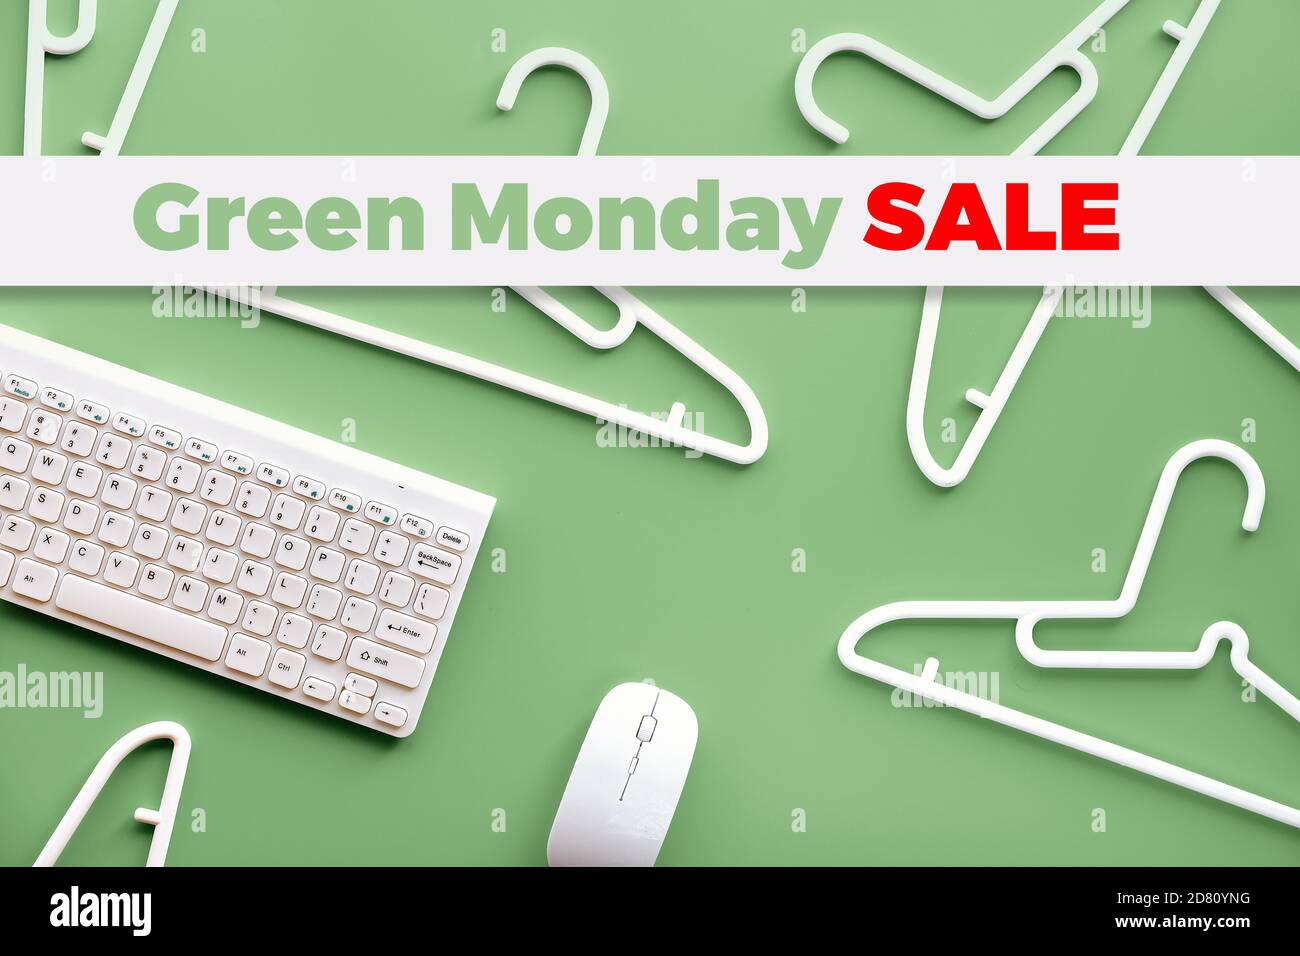 Green Monday sale text on green background with plastic hangers, keyboard and computer mouse Stock Photo